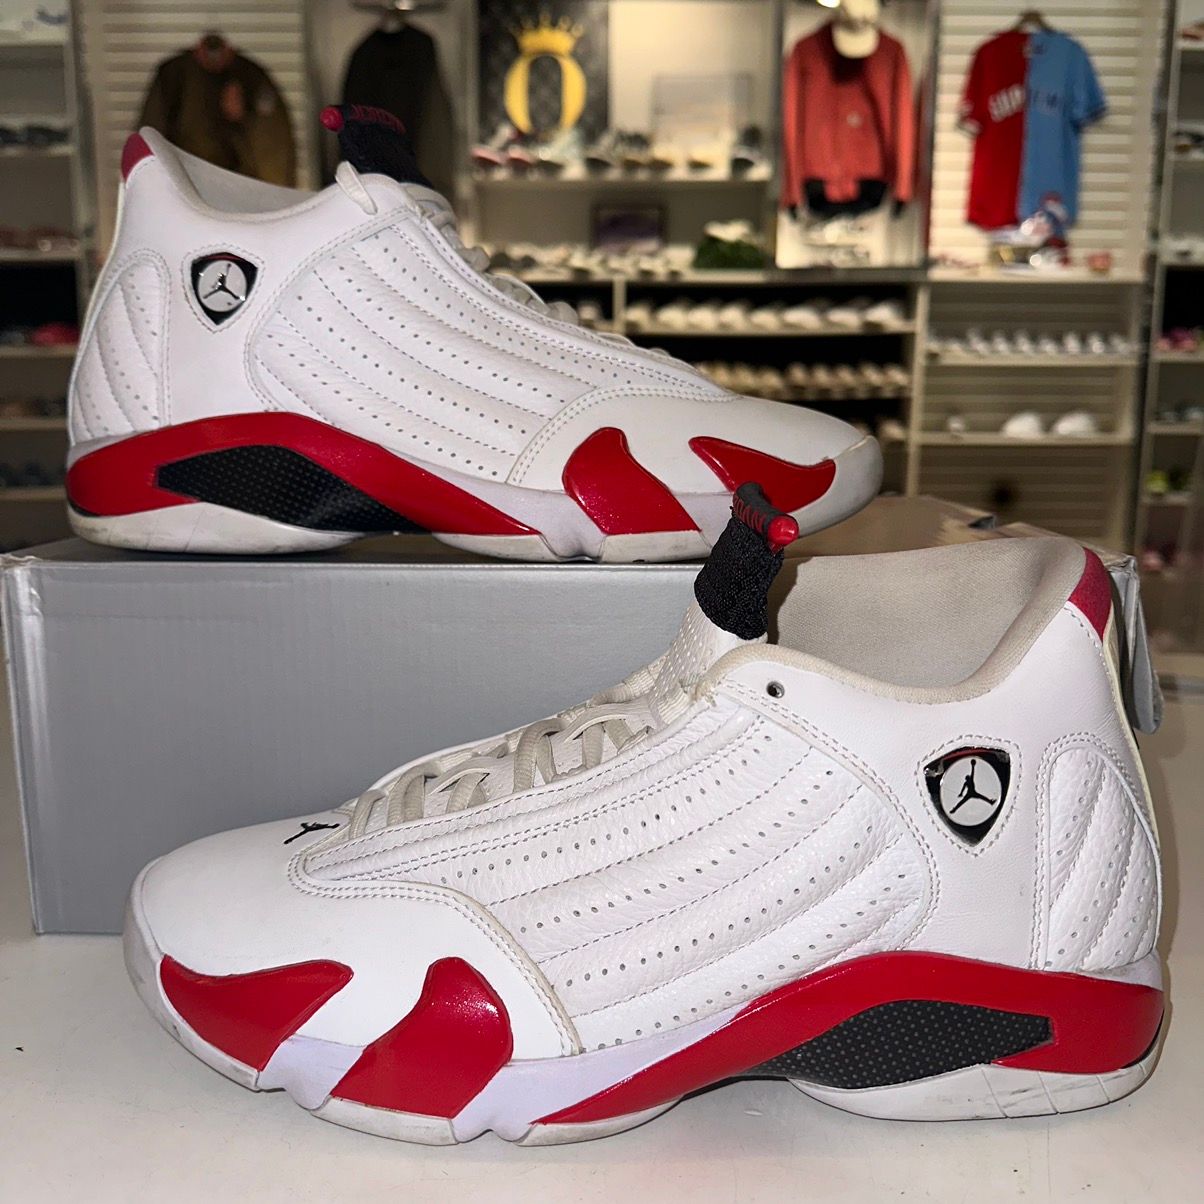 Pre-owned Jordan Brand Size 9 - Air Jordan 14 Retro Candy Cane 2019 Red White Shoes